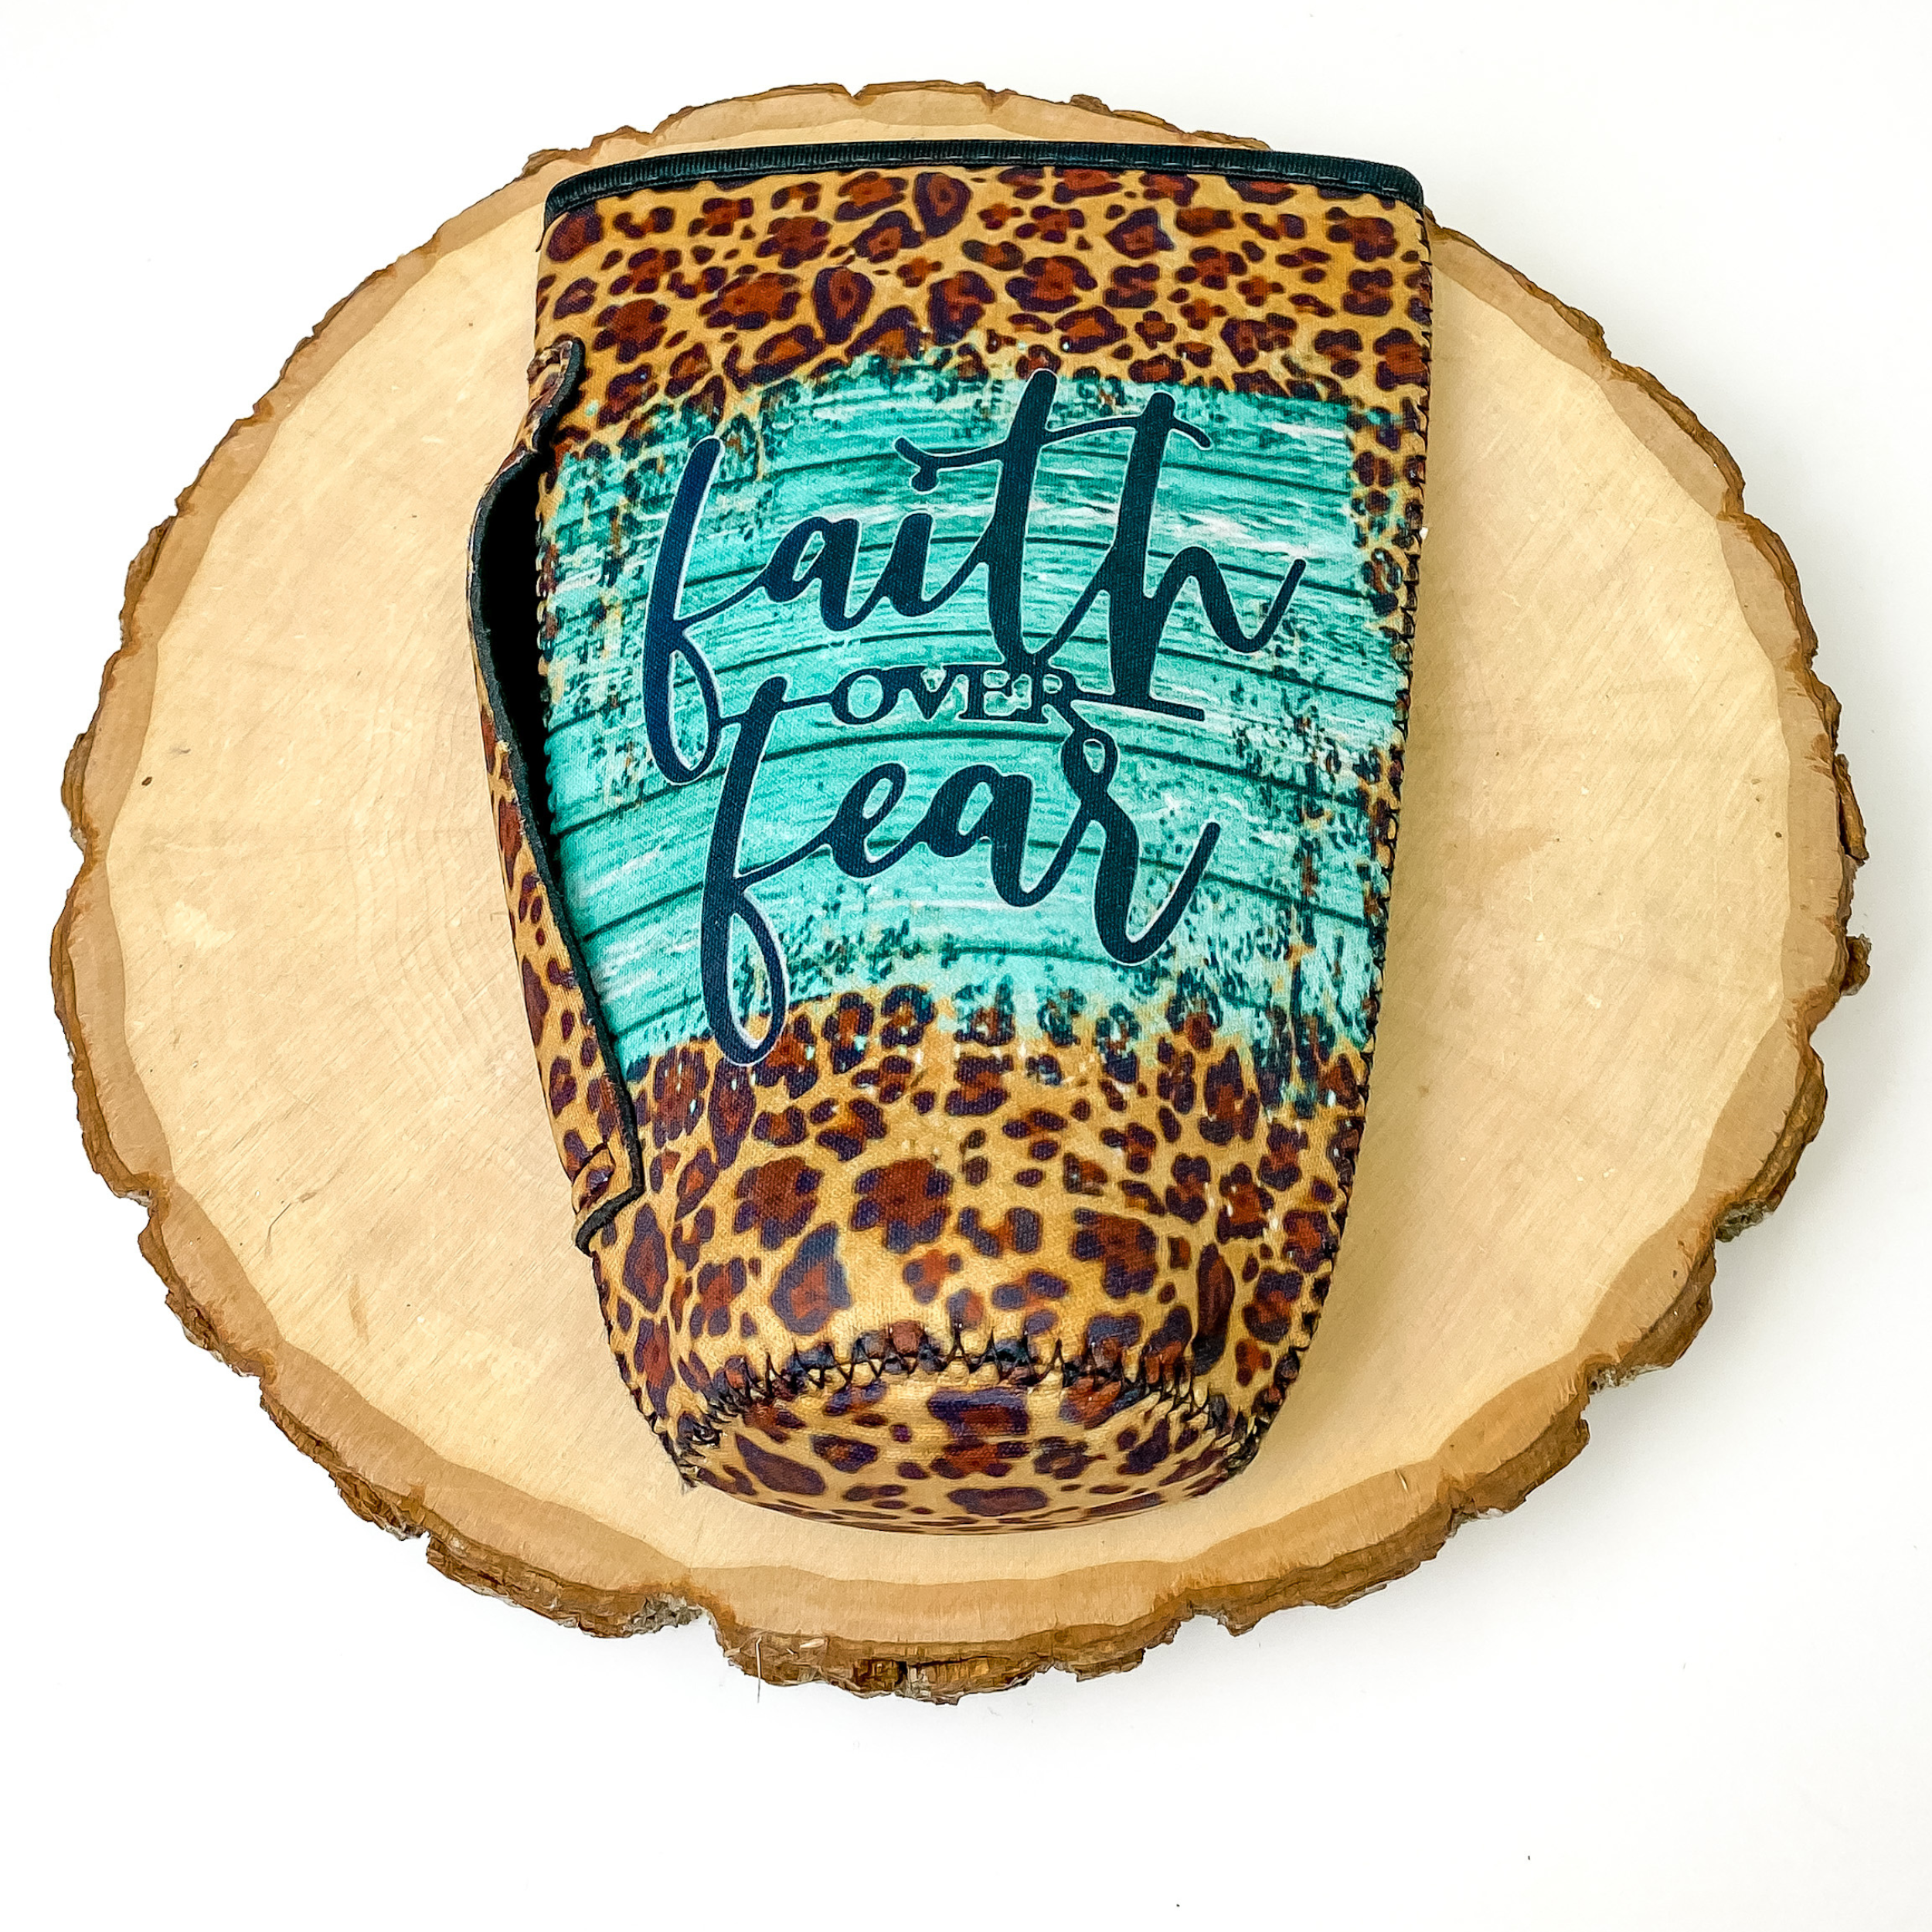 Tumbler drink sleeve with the saying "Faith over fear" with turquoise wood print behind it. This drink sleeve also includes a handle and leopard print all over. This drink sleeve is pictured on a piece of wood on a white background.